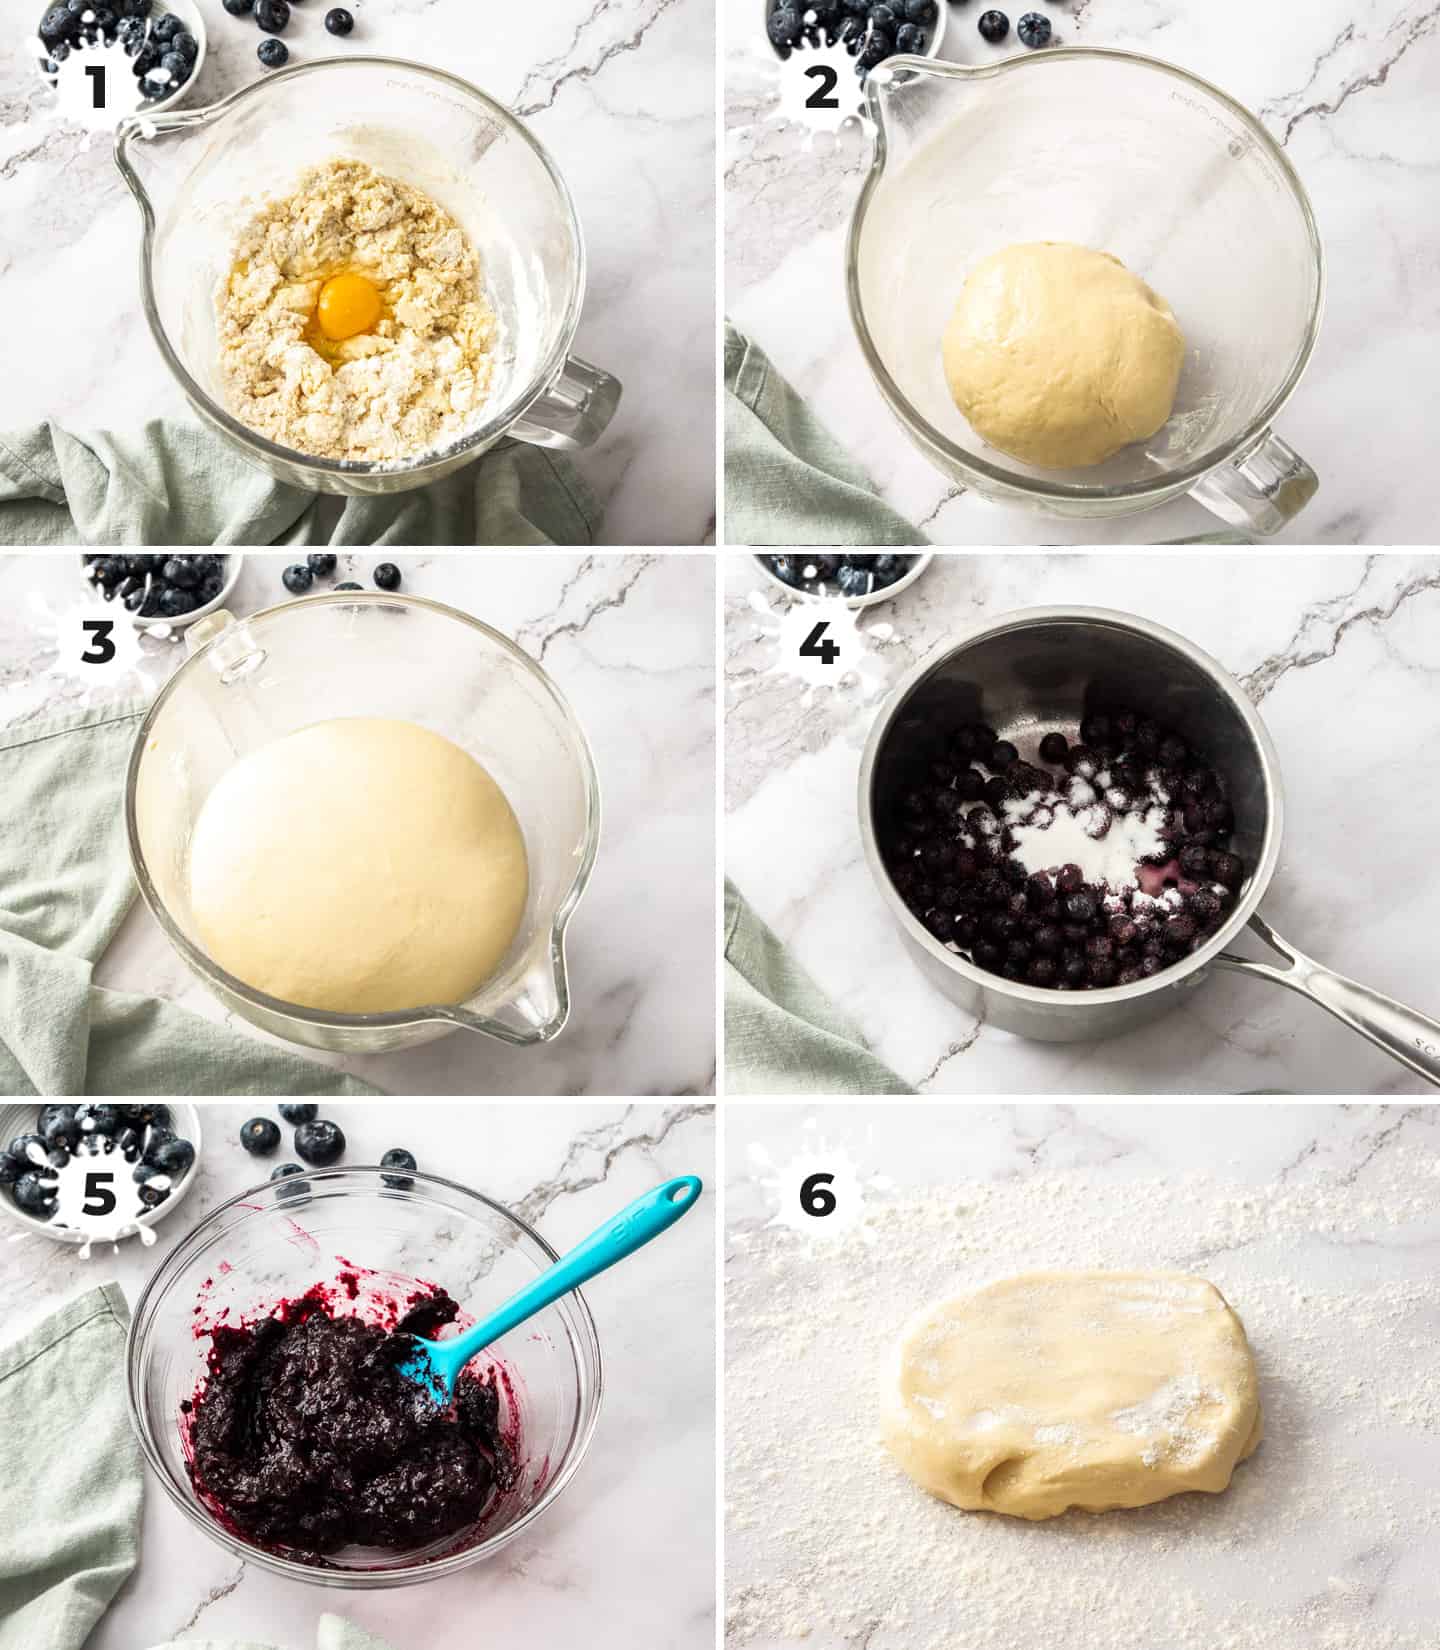 A collage of 6 images showing the steps to making the dough and blueberry jam.